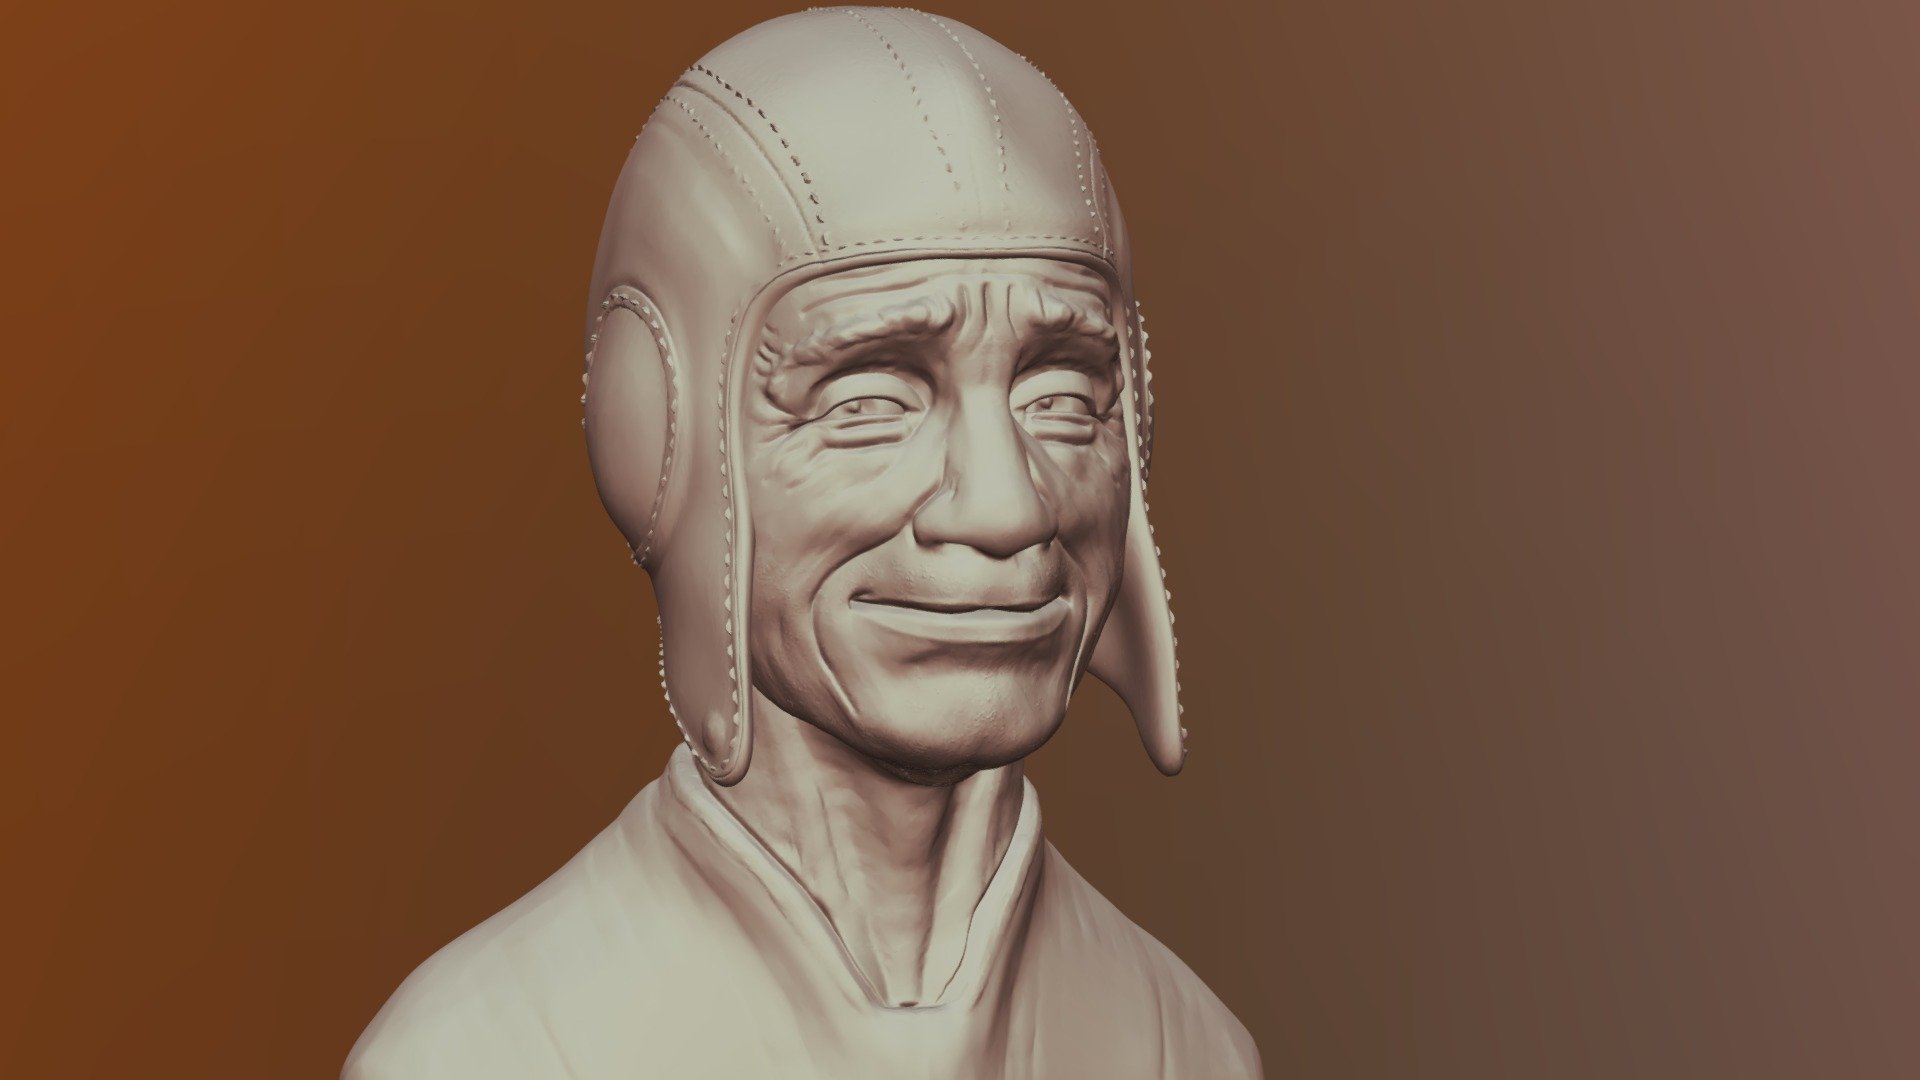 astropad with zbrush